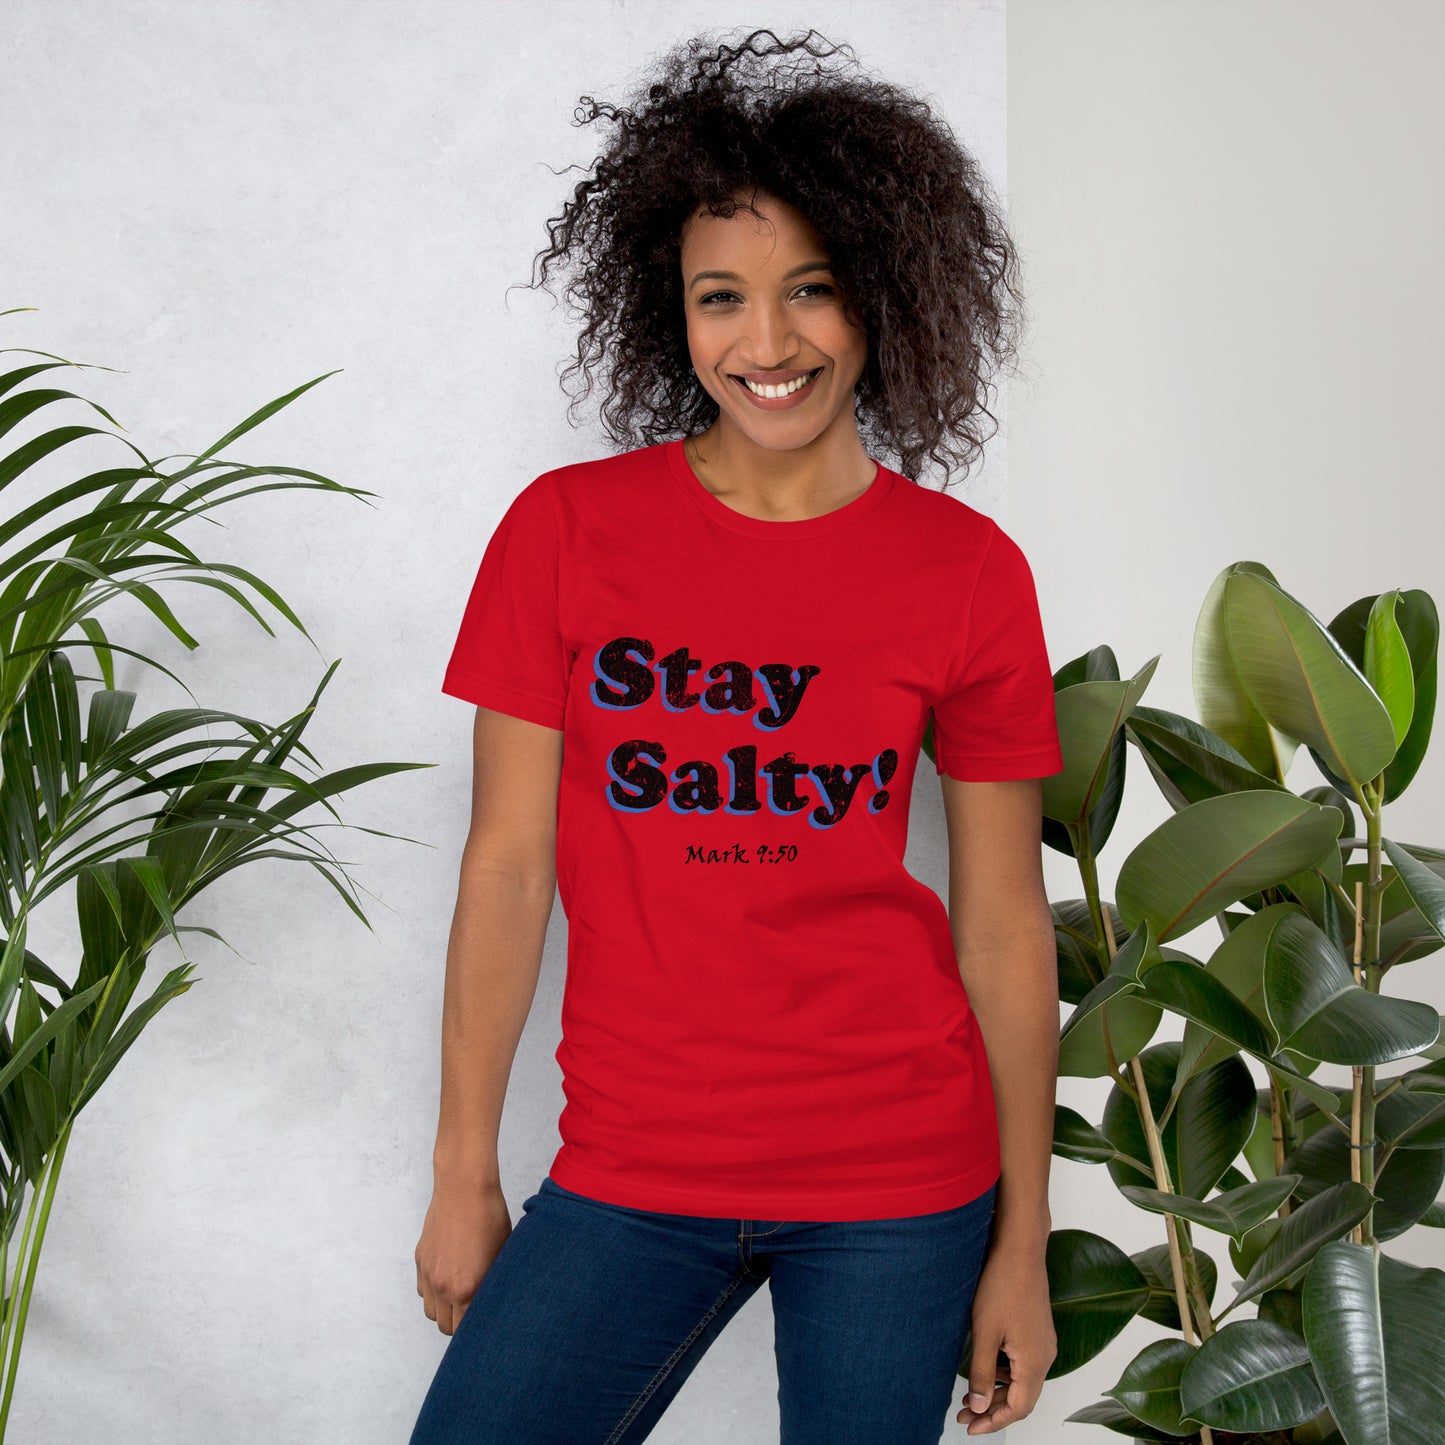 Stay Salty! Faded Unisex t-shirt - Solid Rock Designs | Christian Apparel